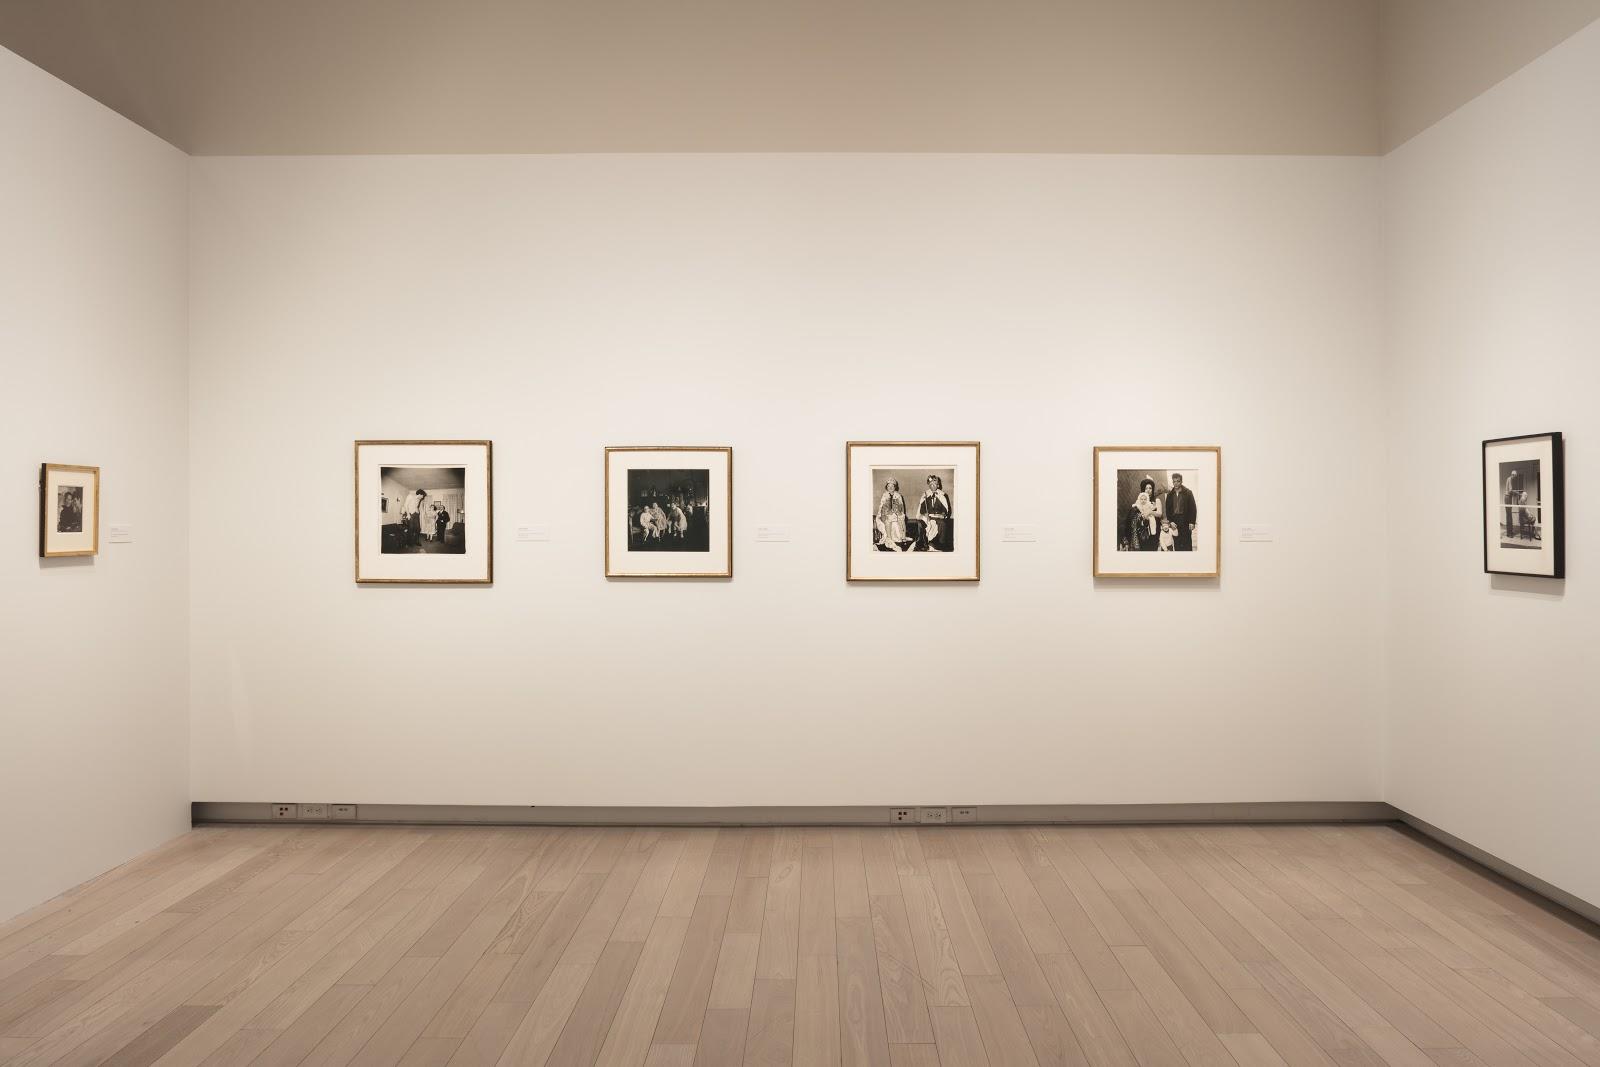 Photographs from the Howard and Carole Tanenbaum Photography collection on display at the Ryerson Image Centre